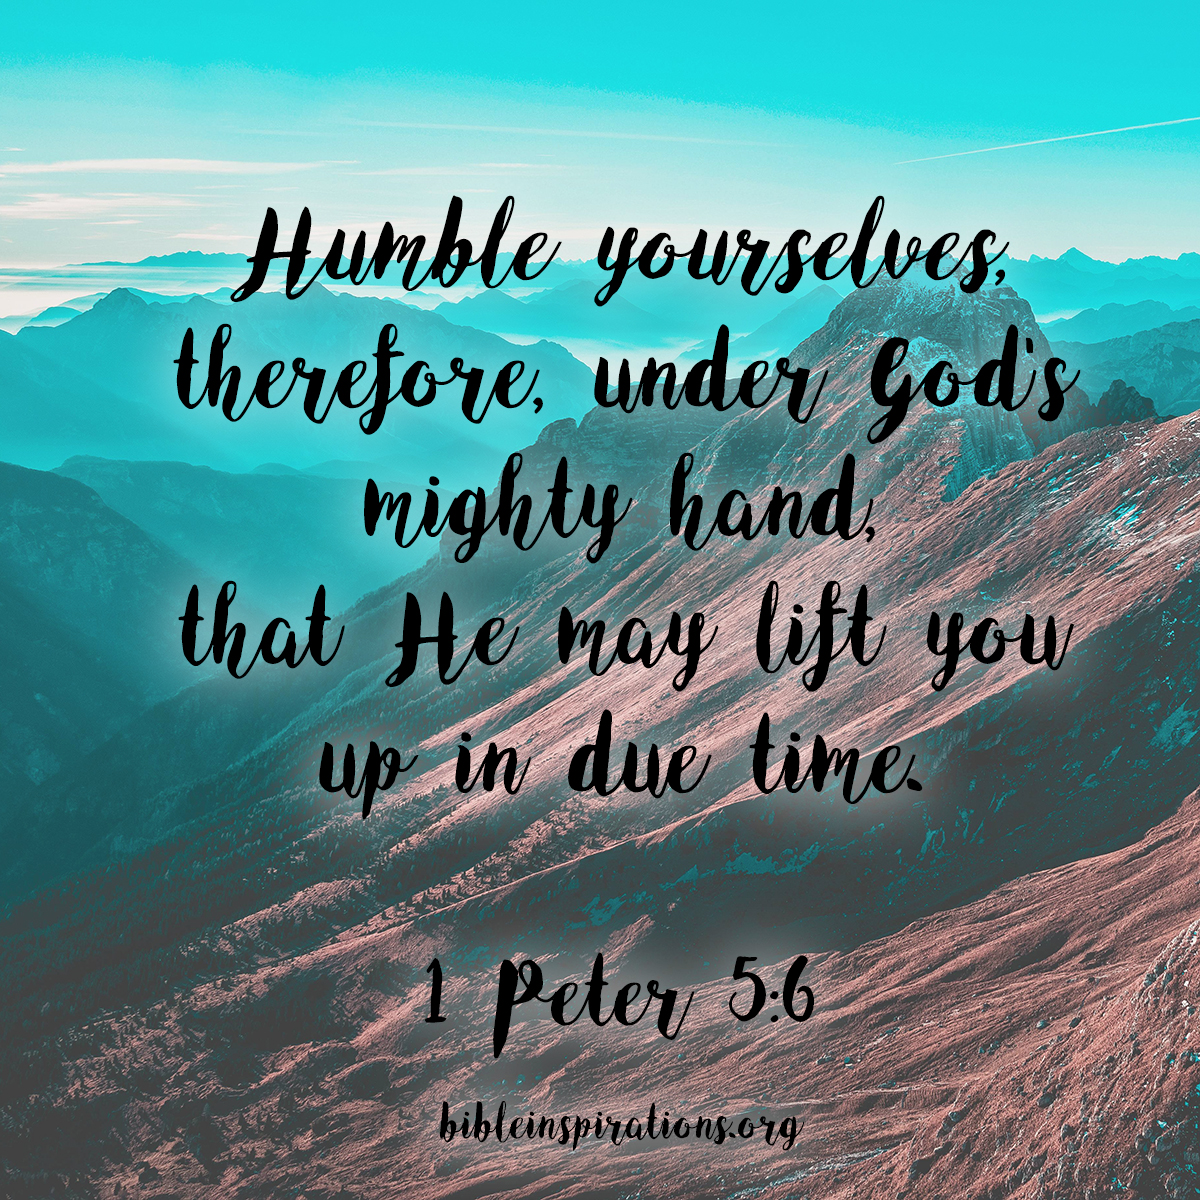 Humble yourselves, therefore, under God's mighty hand, that He may lift you up in due time. - 1 Peter 5:6